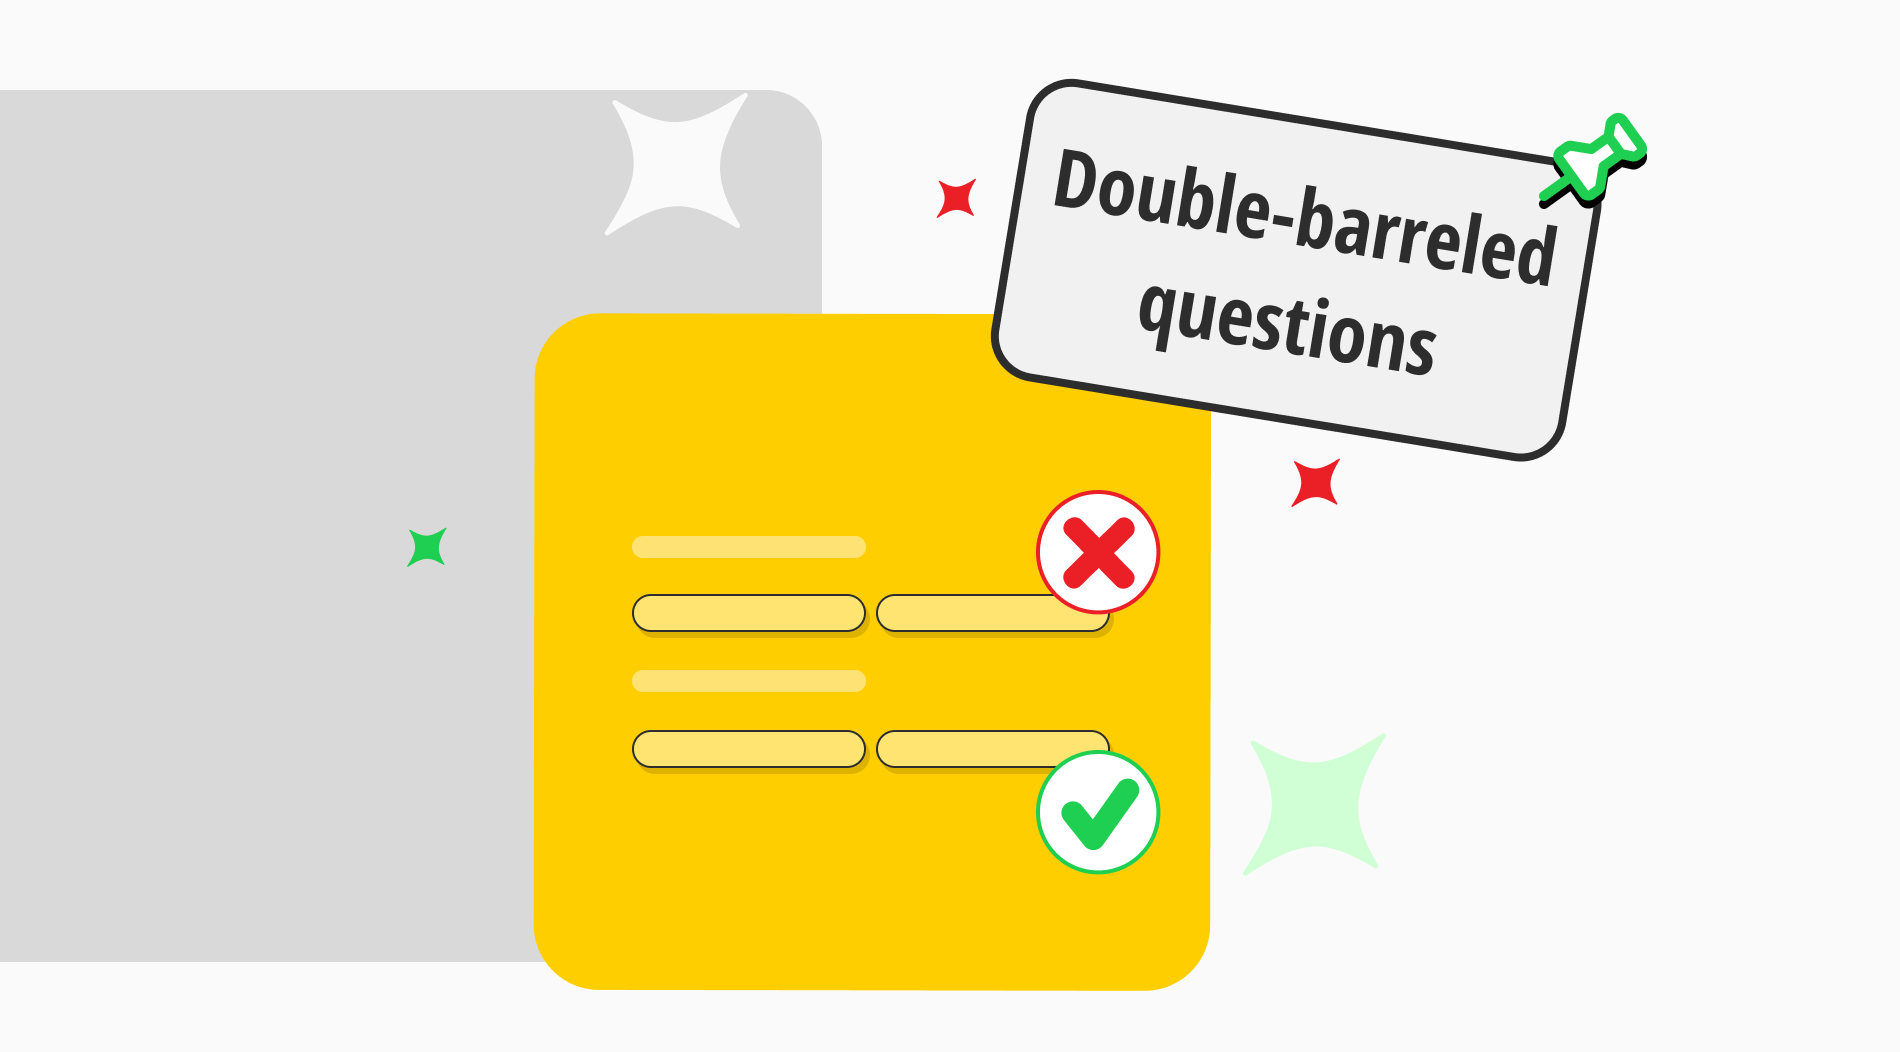 Double-barreled question: Definition, examples & how to avoid it